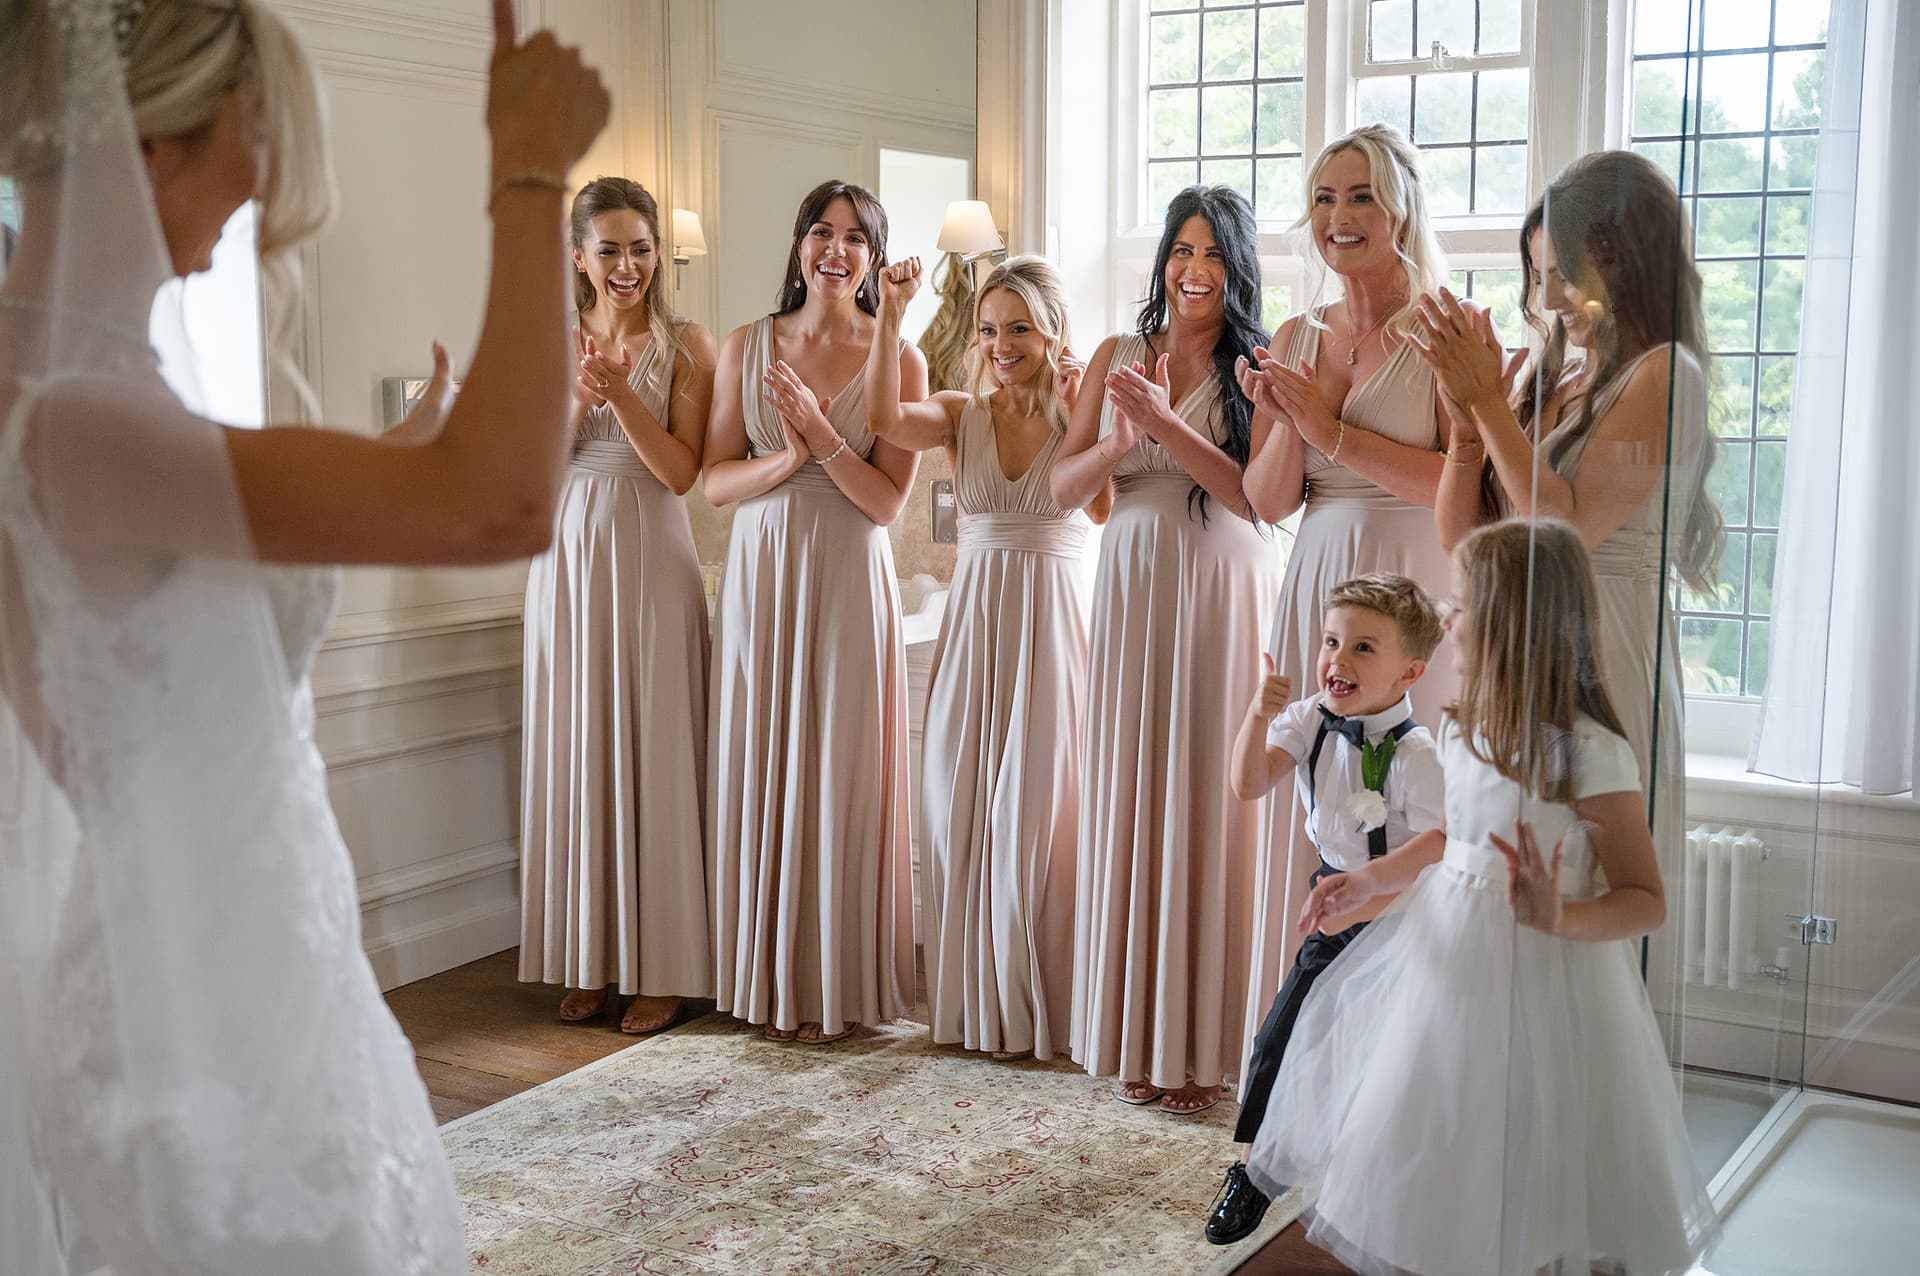 Bridesmaids' reaction to seeing bride in her dress with pageboy giving a thumbs up